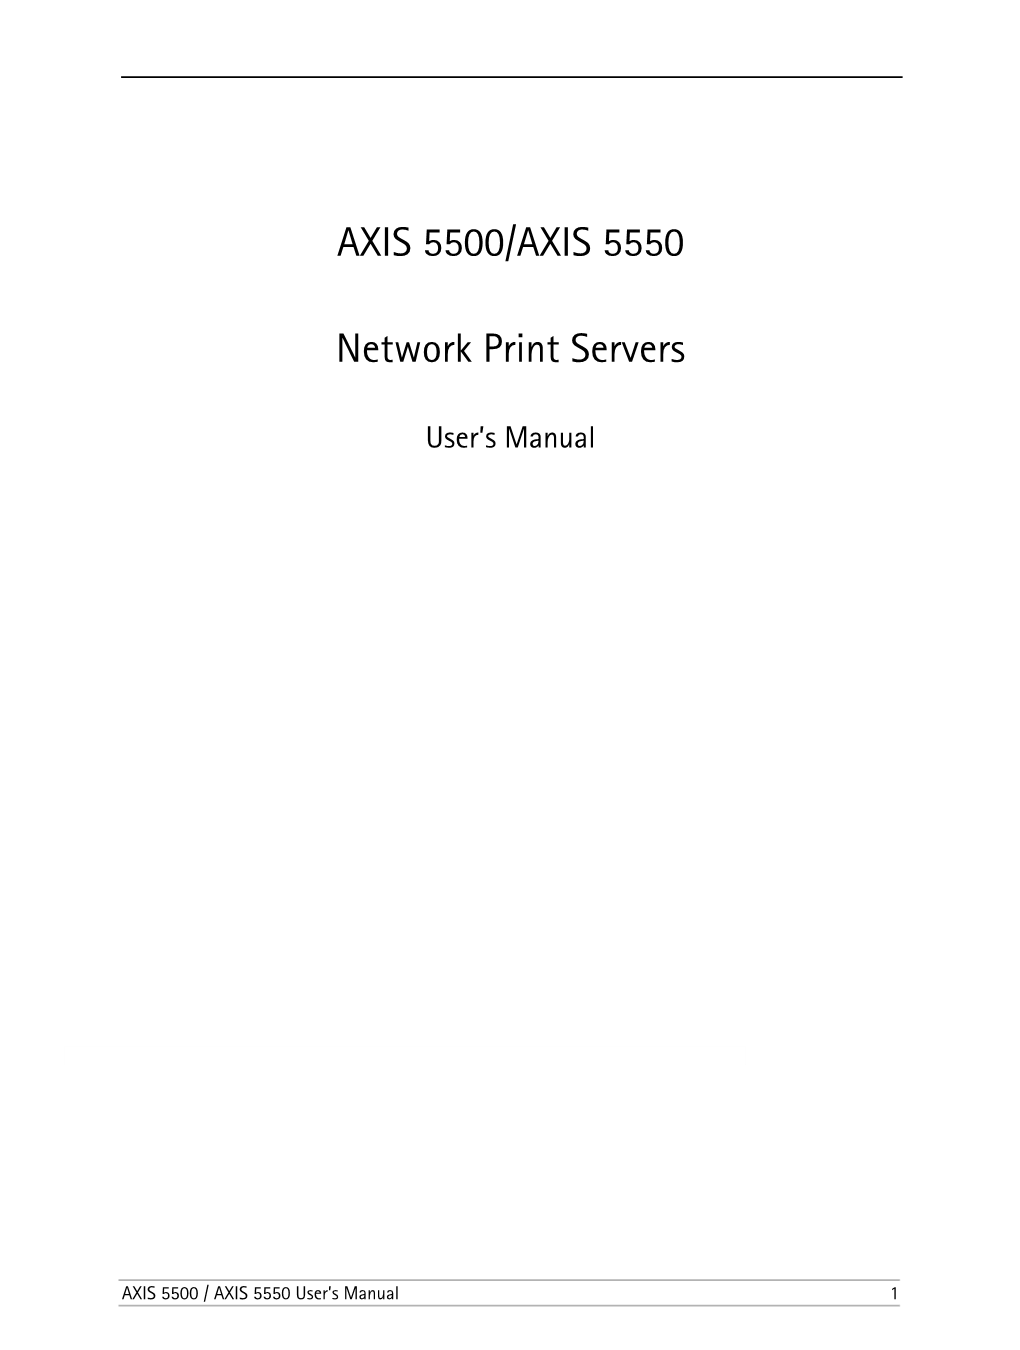 AXIS 5500/AXIS 5550 Network Print Servers